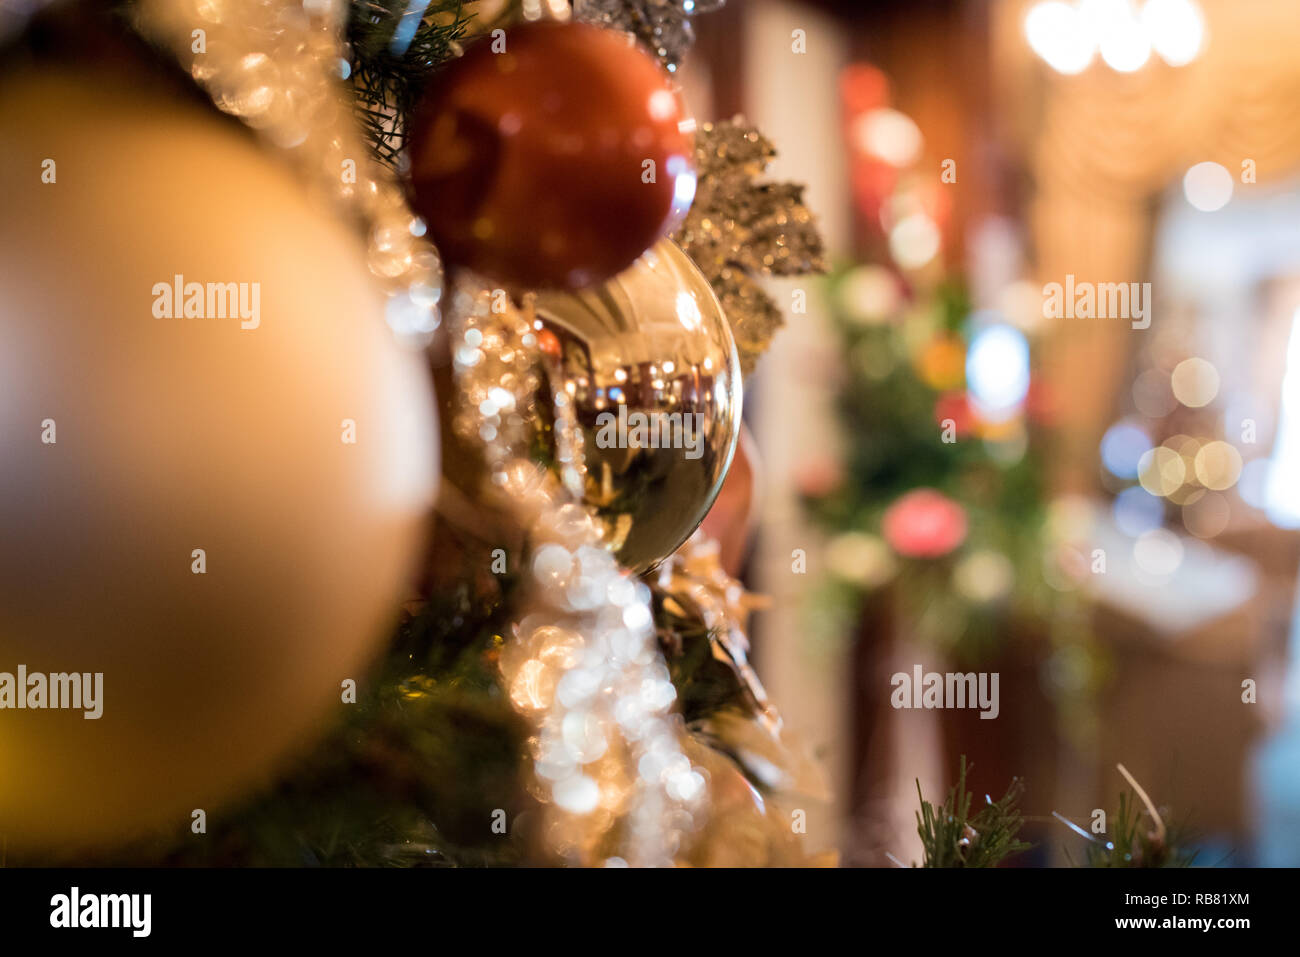 Christmas decorations on a tree Stock Photo